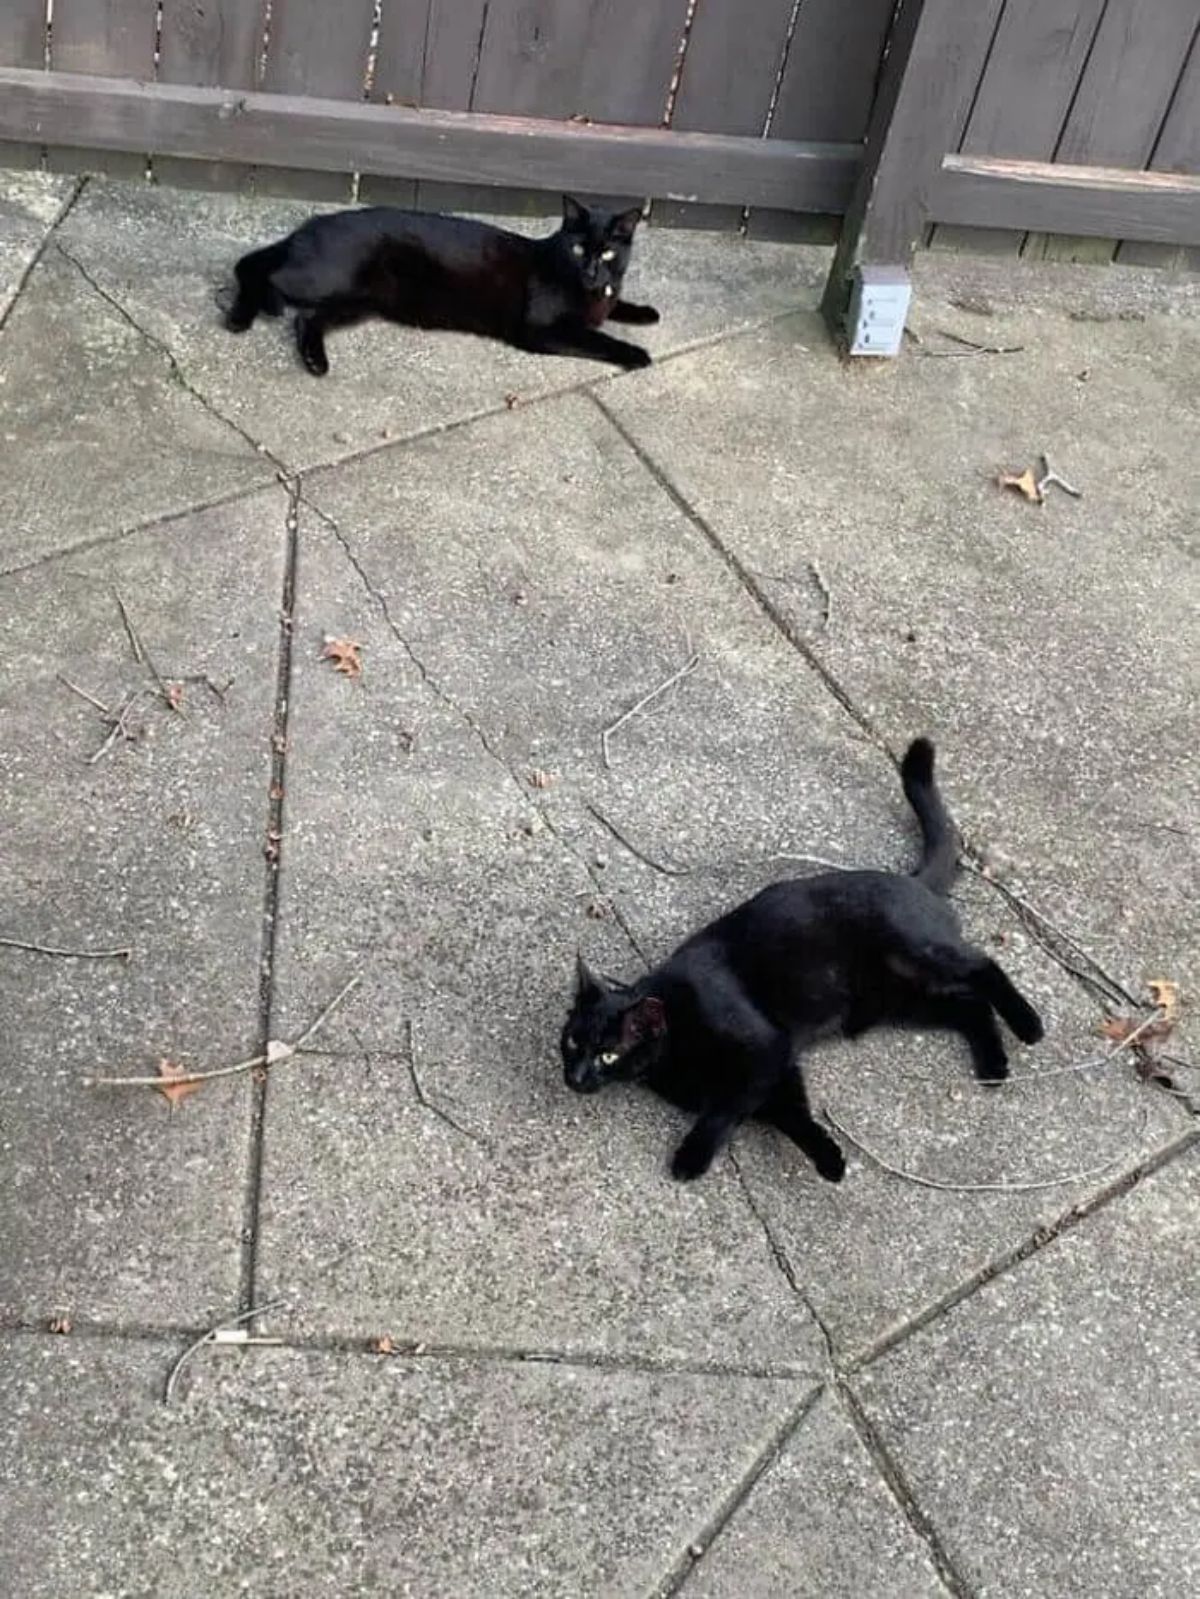 2 black cats laying on the ground a little away from each other